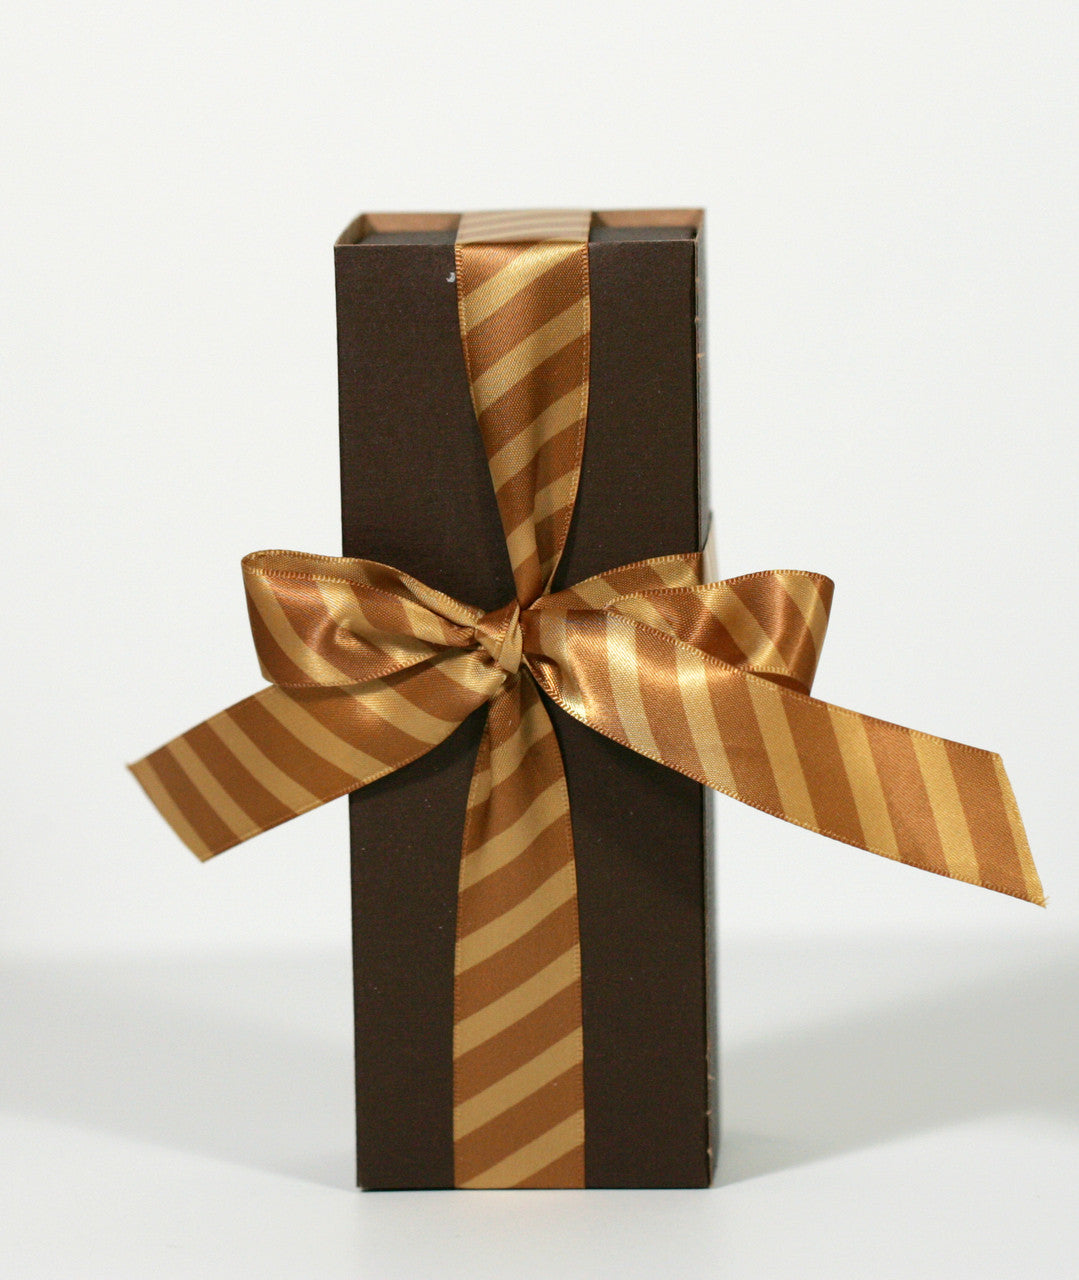 A box of chocolates tied with our caramel ribbon will make any treat even sweeter!